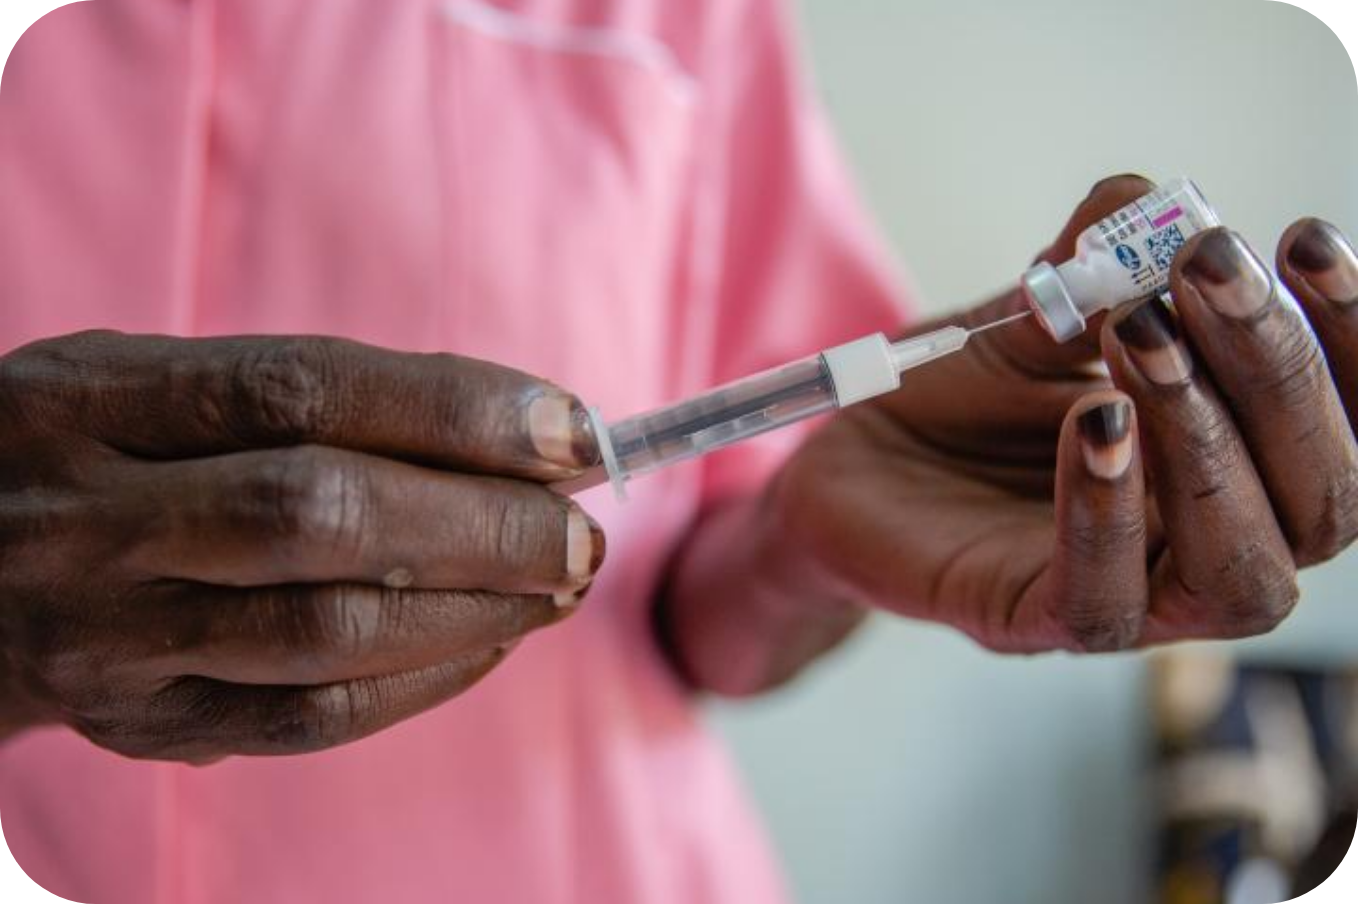 Nurse Margaret gives an injection to a client at Kawala Health Center IV in Uganda - Action Aid report